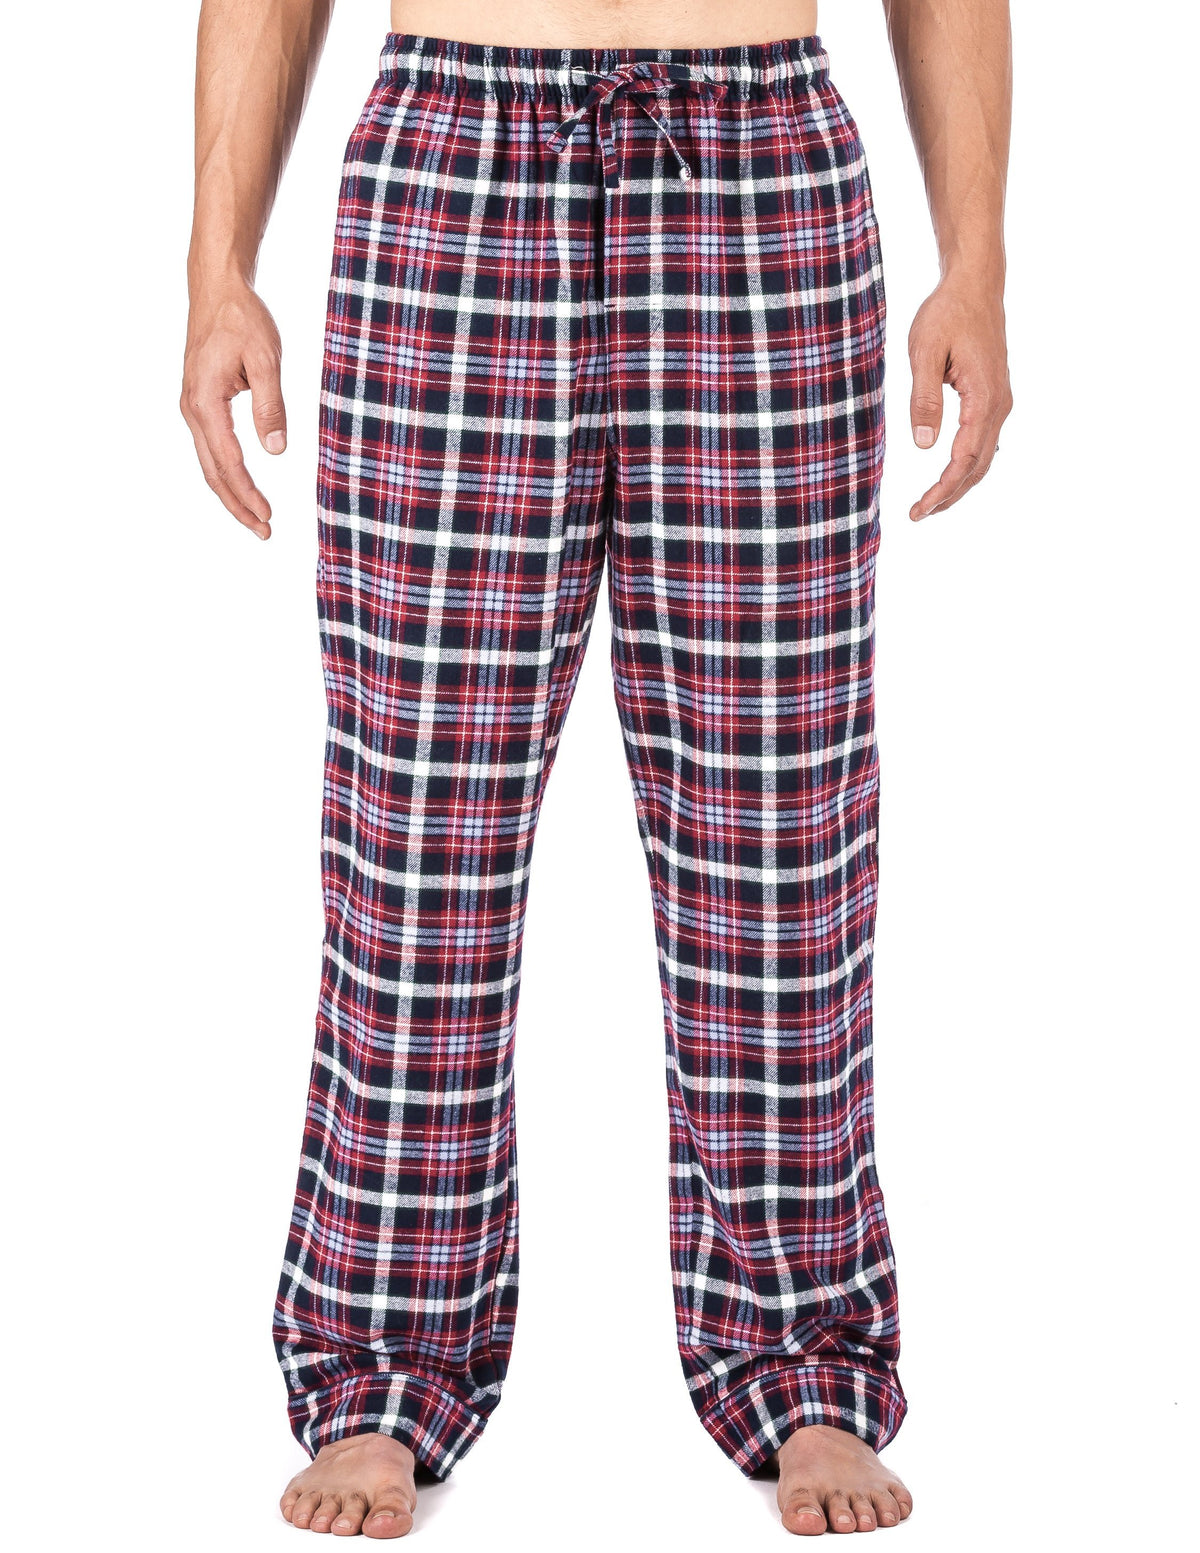 Mens Gingham 100% Cotton Flannel Lounge Pants - Blue/Red